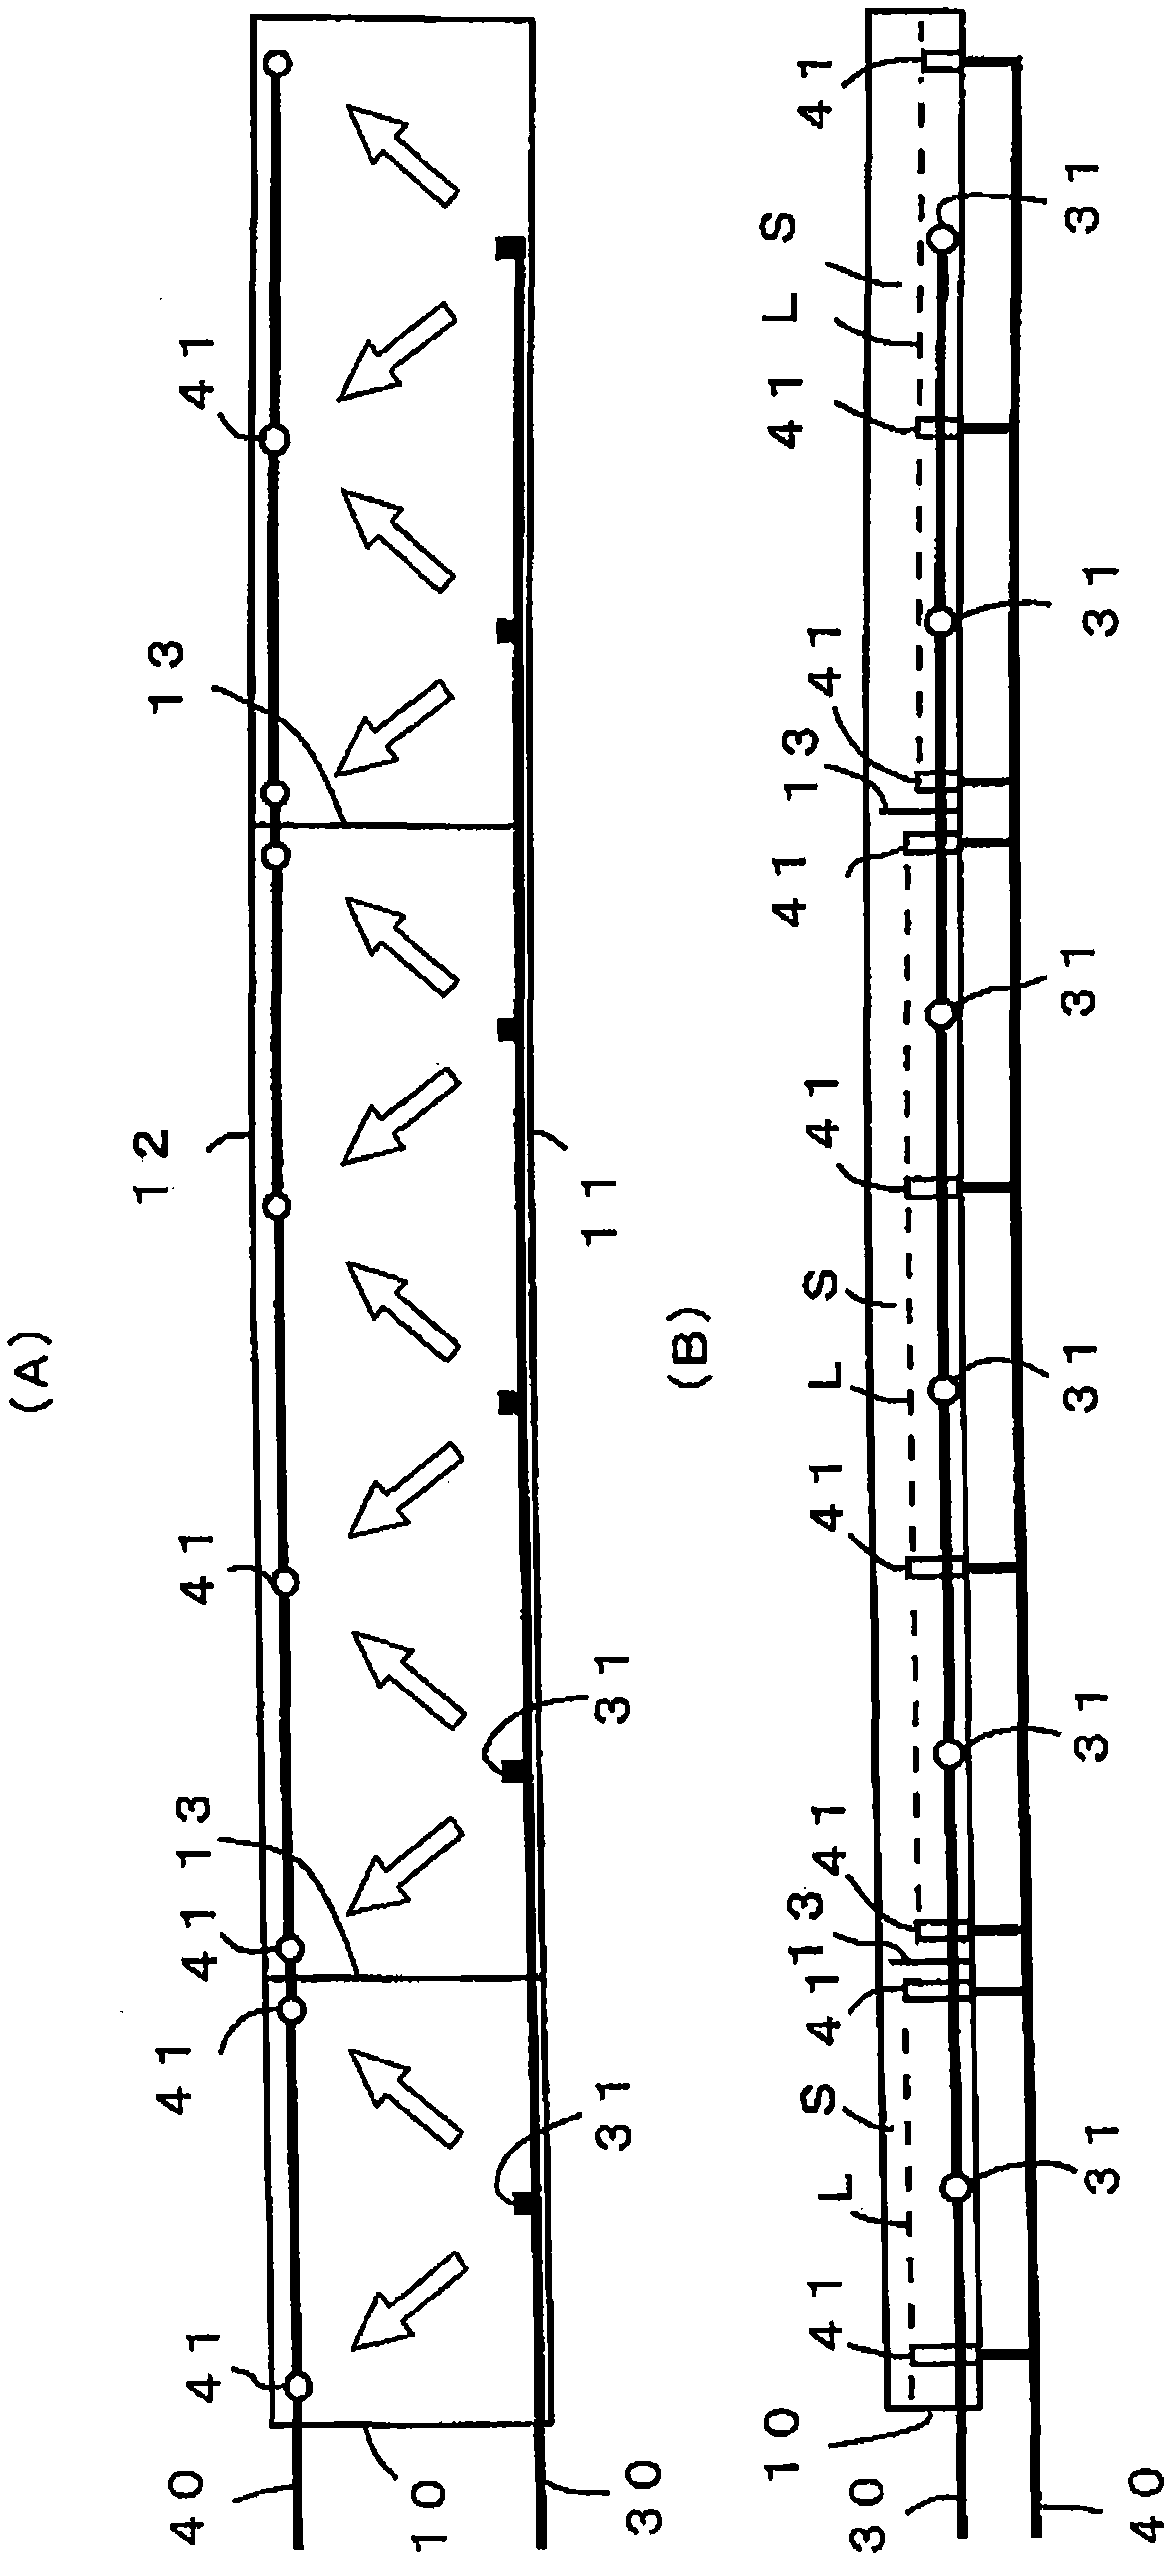 Culture solution planting device